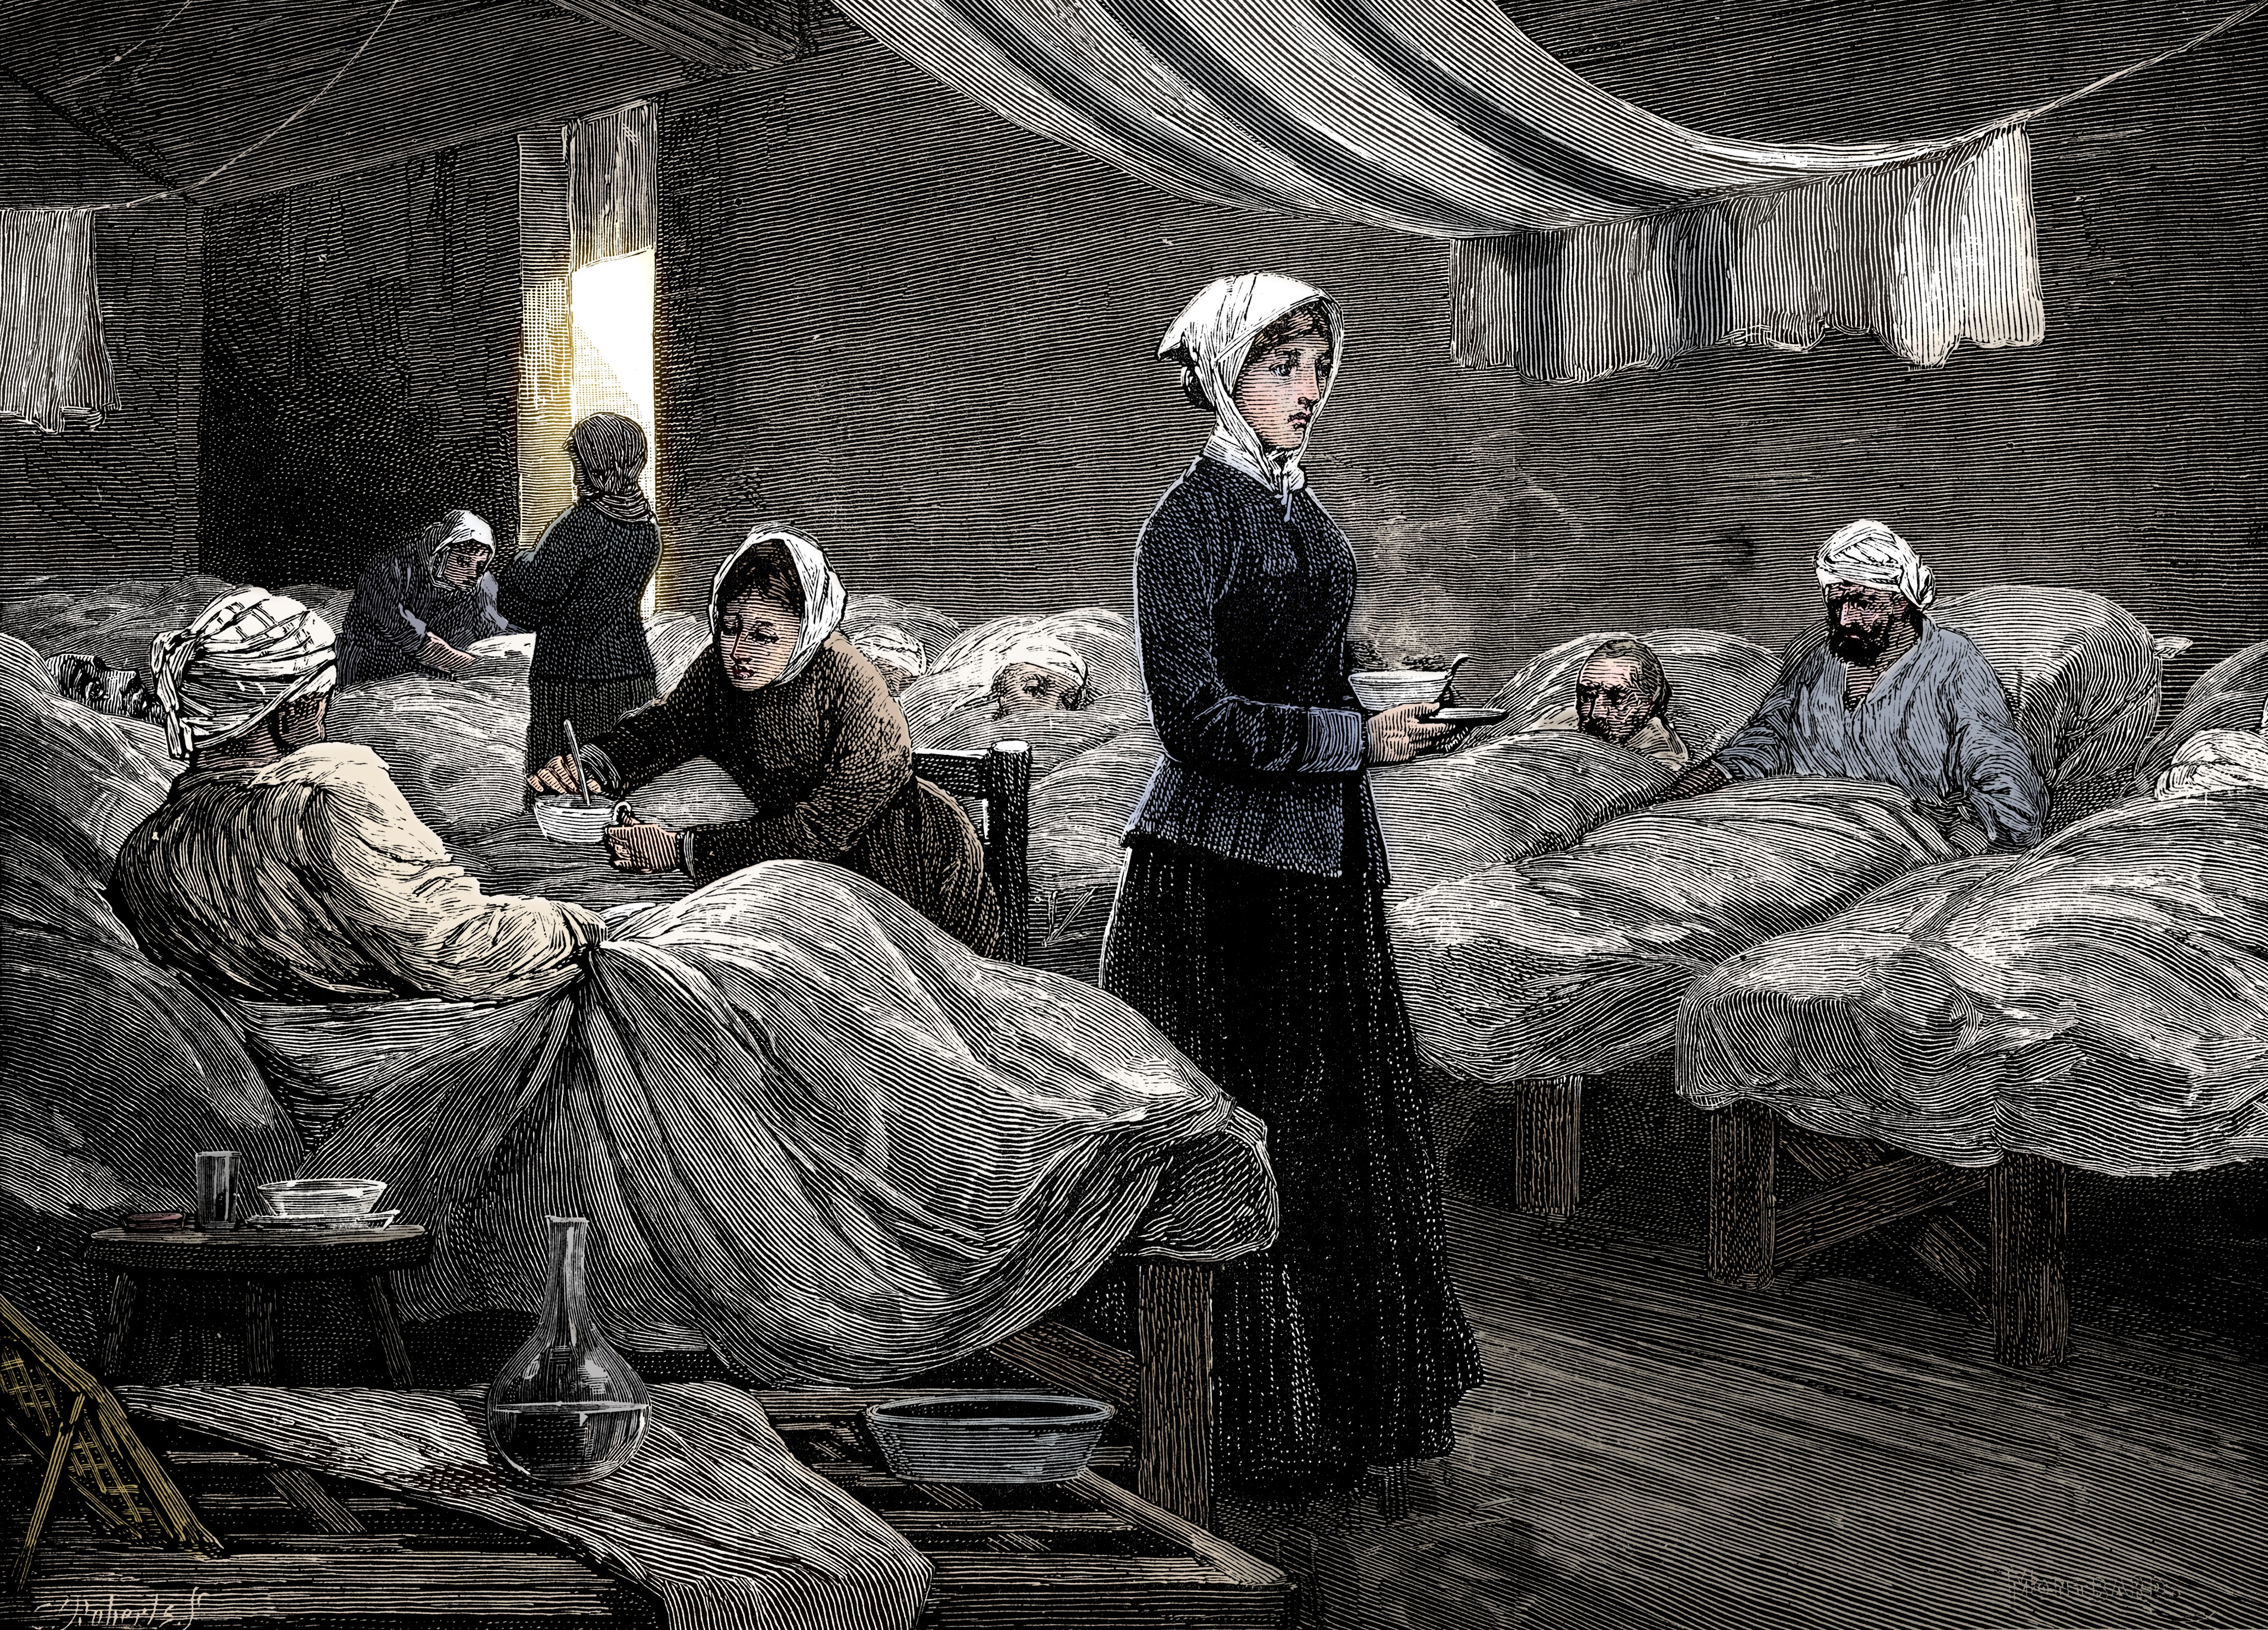 Engraving of Florence Nightingale in the barrack hospital at Scutari, c1880.